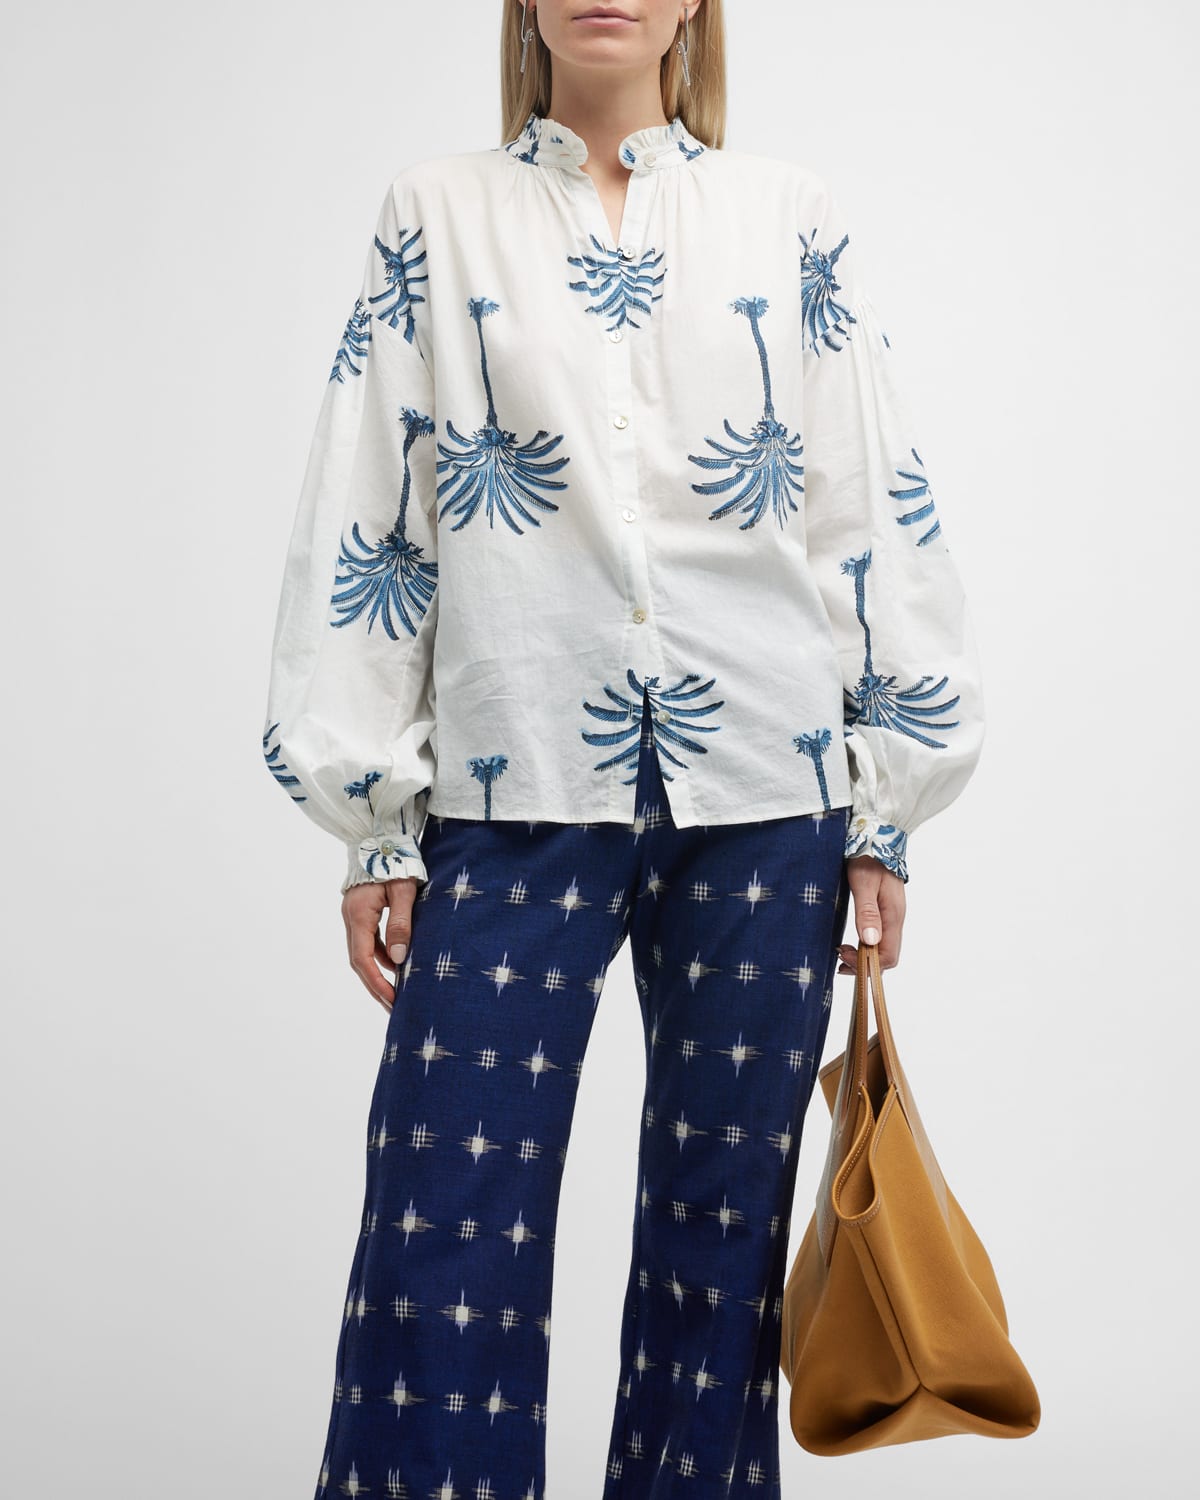 Alix of Bohemia Poet Palm-Printed Button-Front Blouse